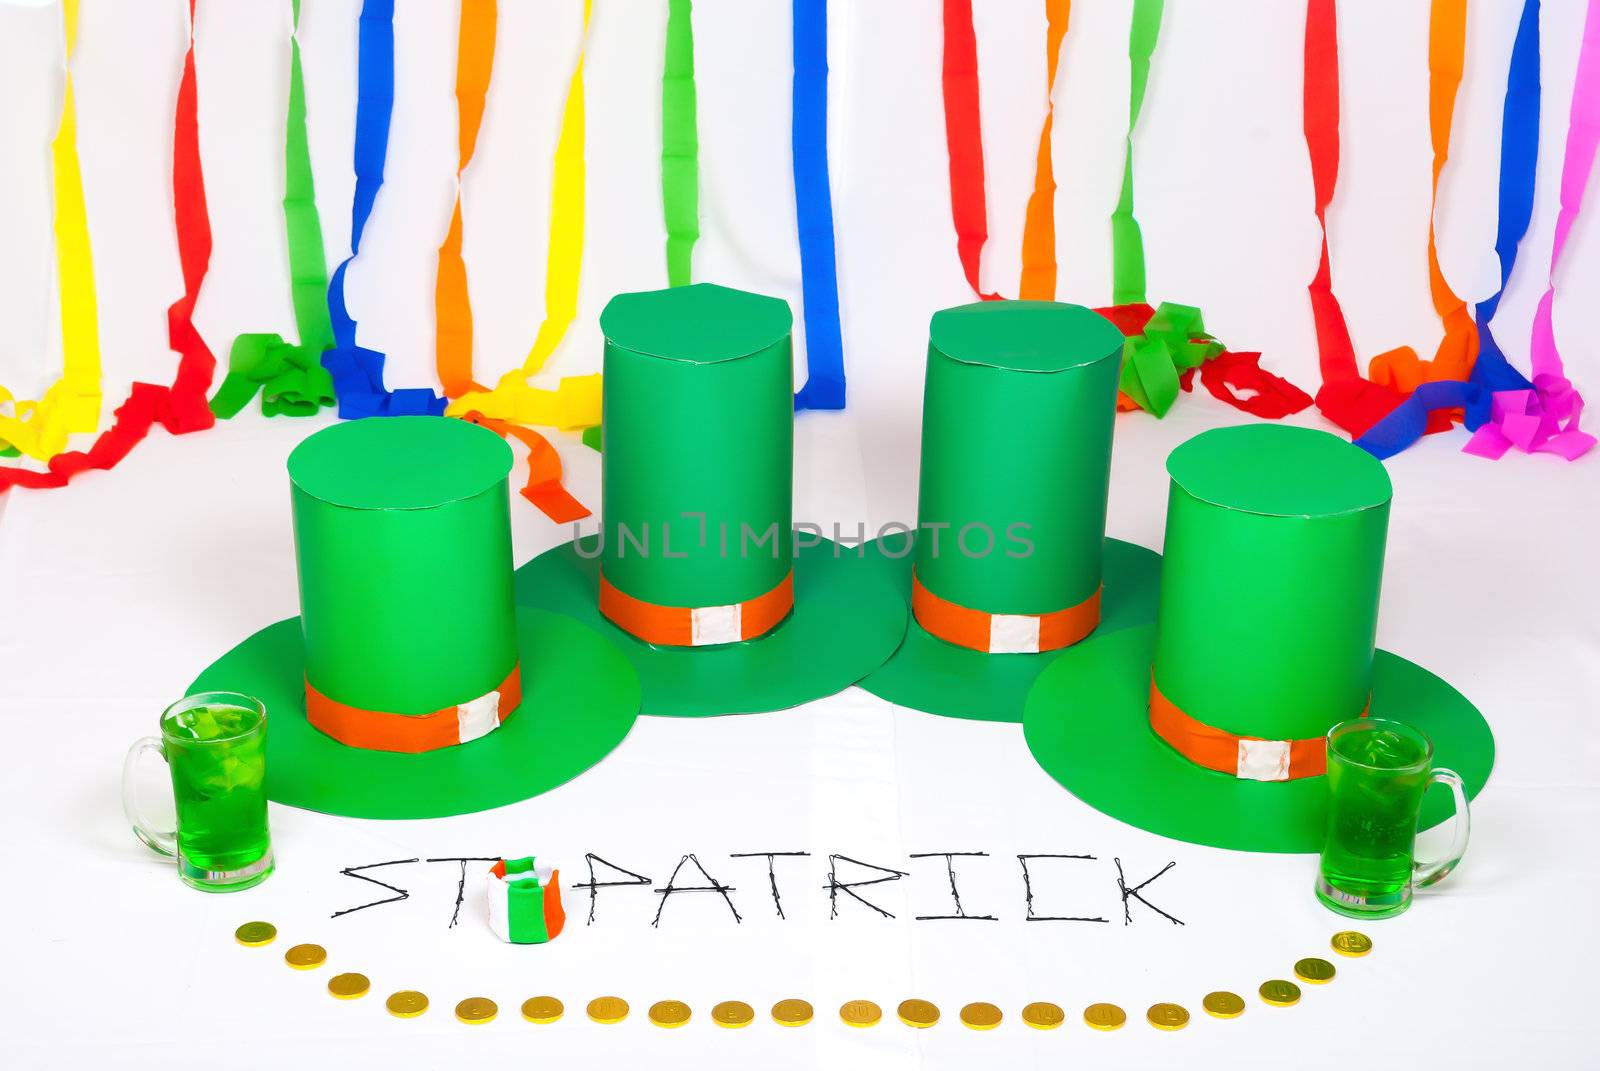 Symbol of St.Patrick's with colorful backdrop